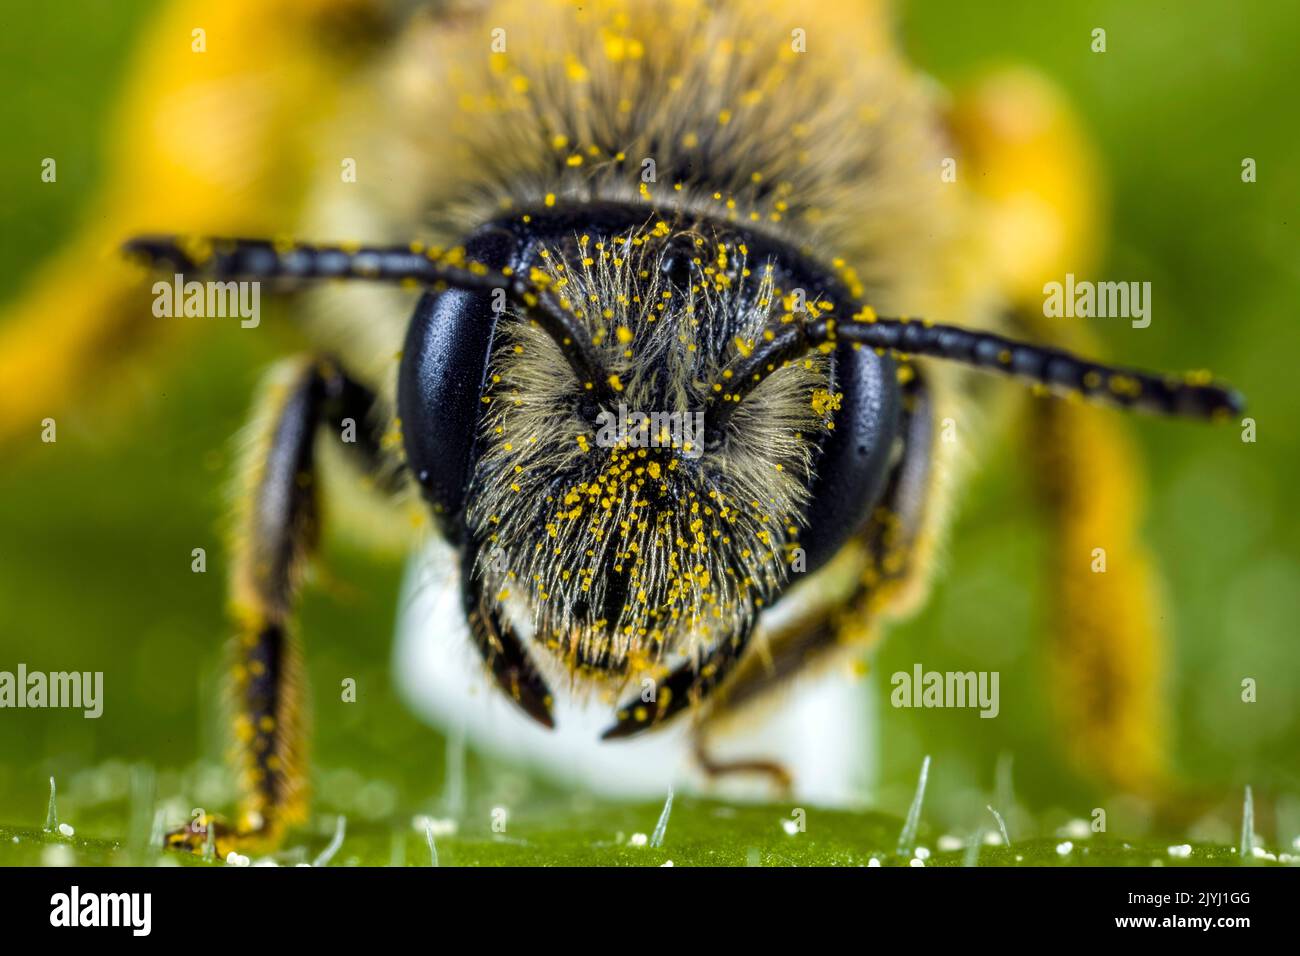 Grey-Patched Mining-Bee (Andrena nitida, Andrena pubescens), female, portrait, Germany Stock Photo